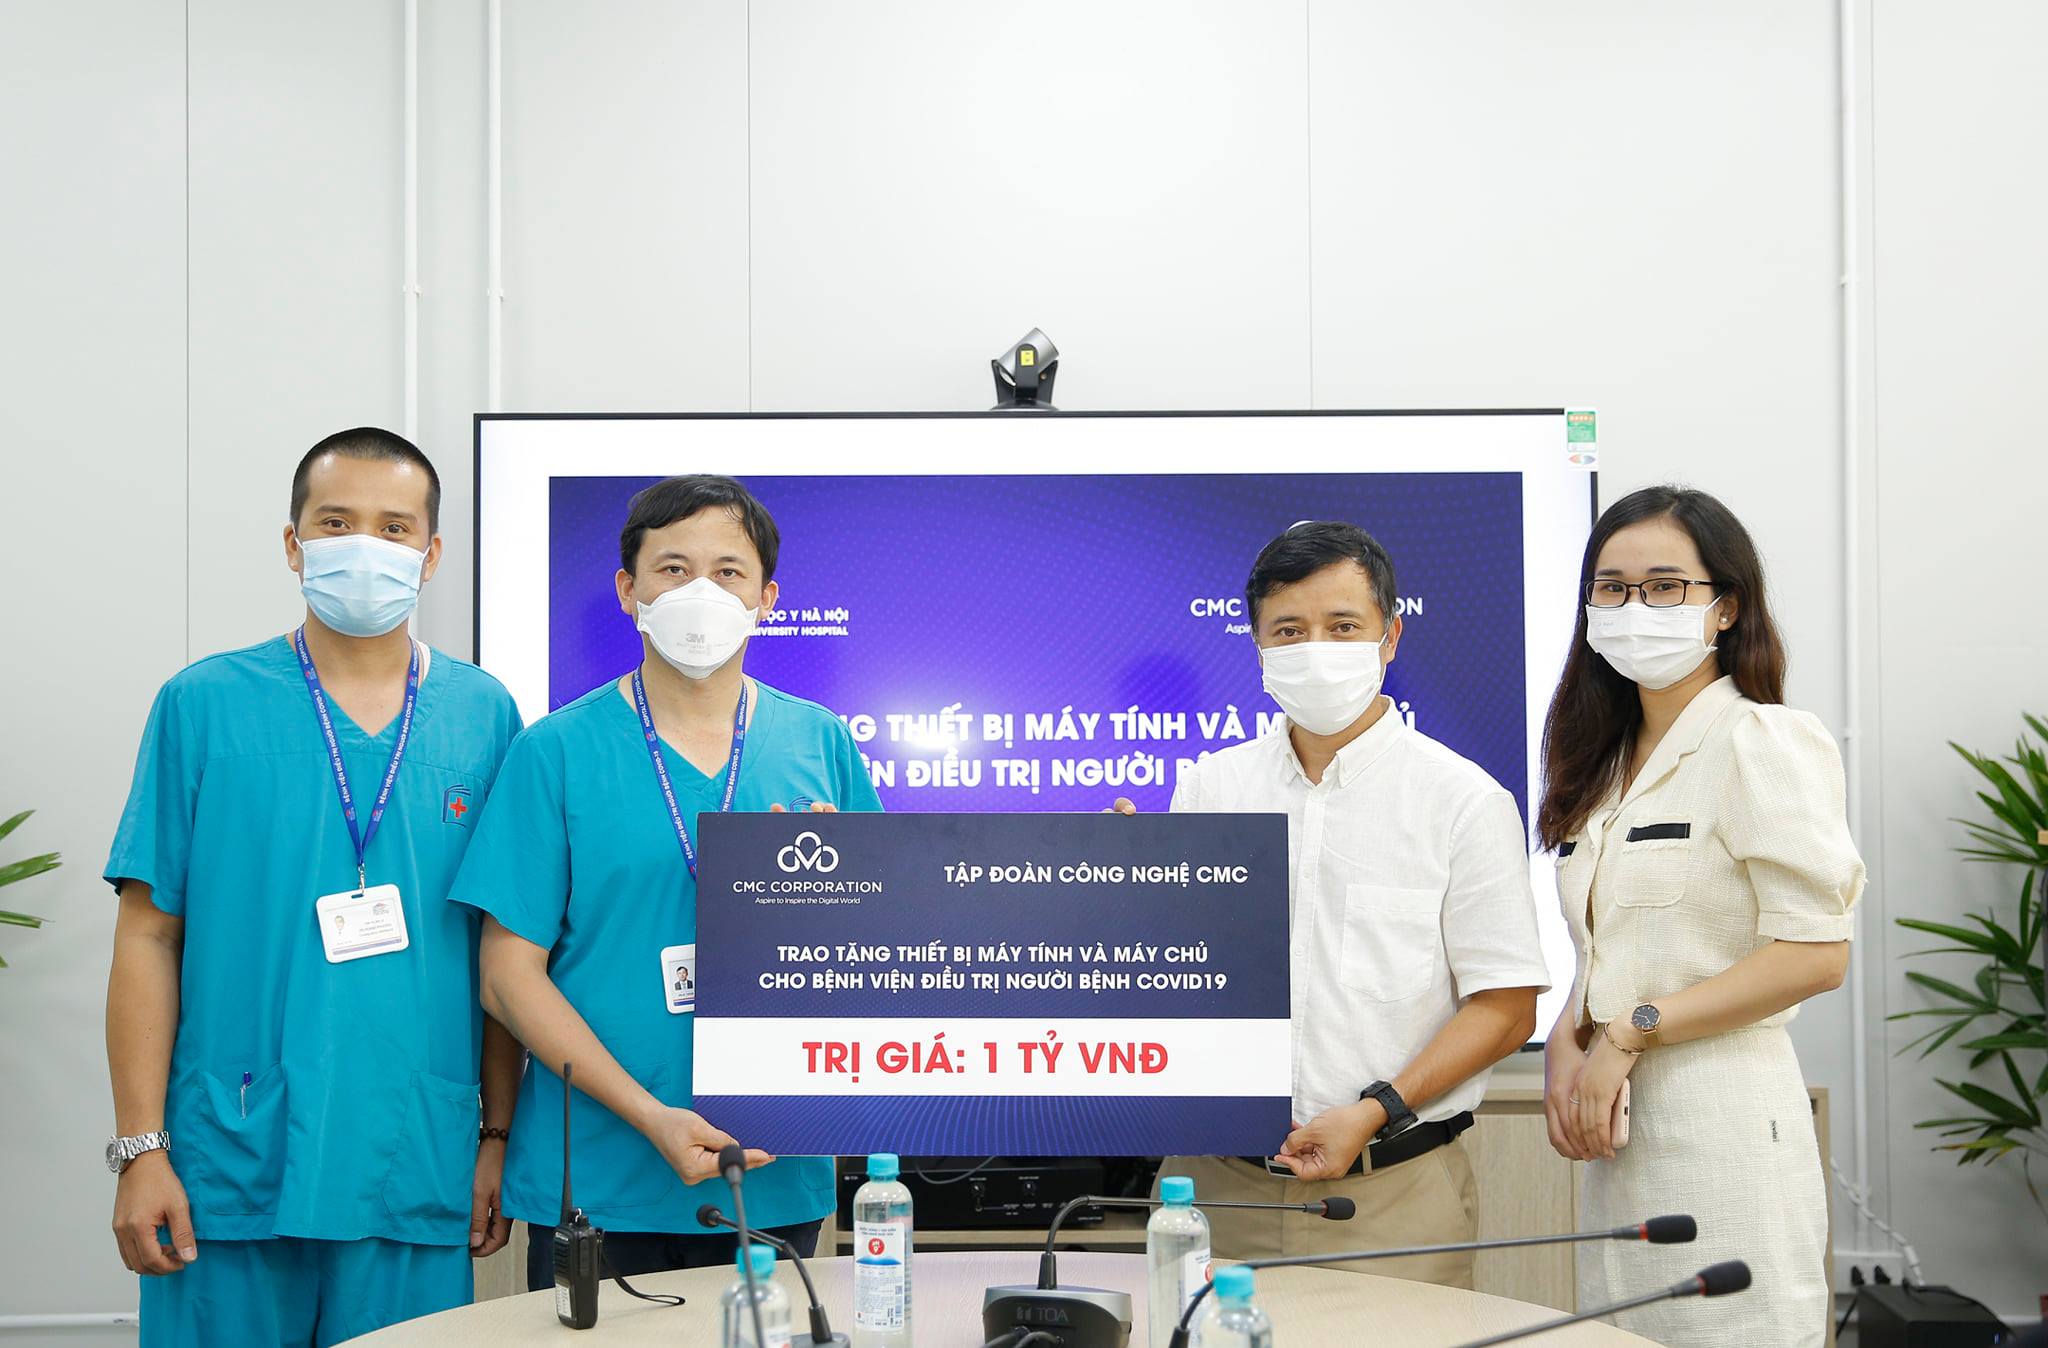 CMC presents computers and server system to Hanoi Medical University Hospital